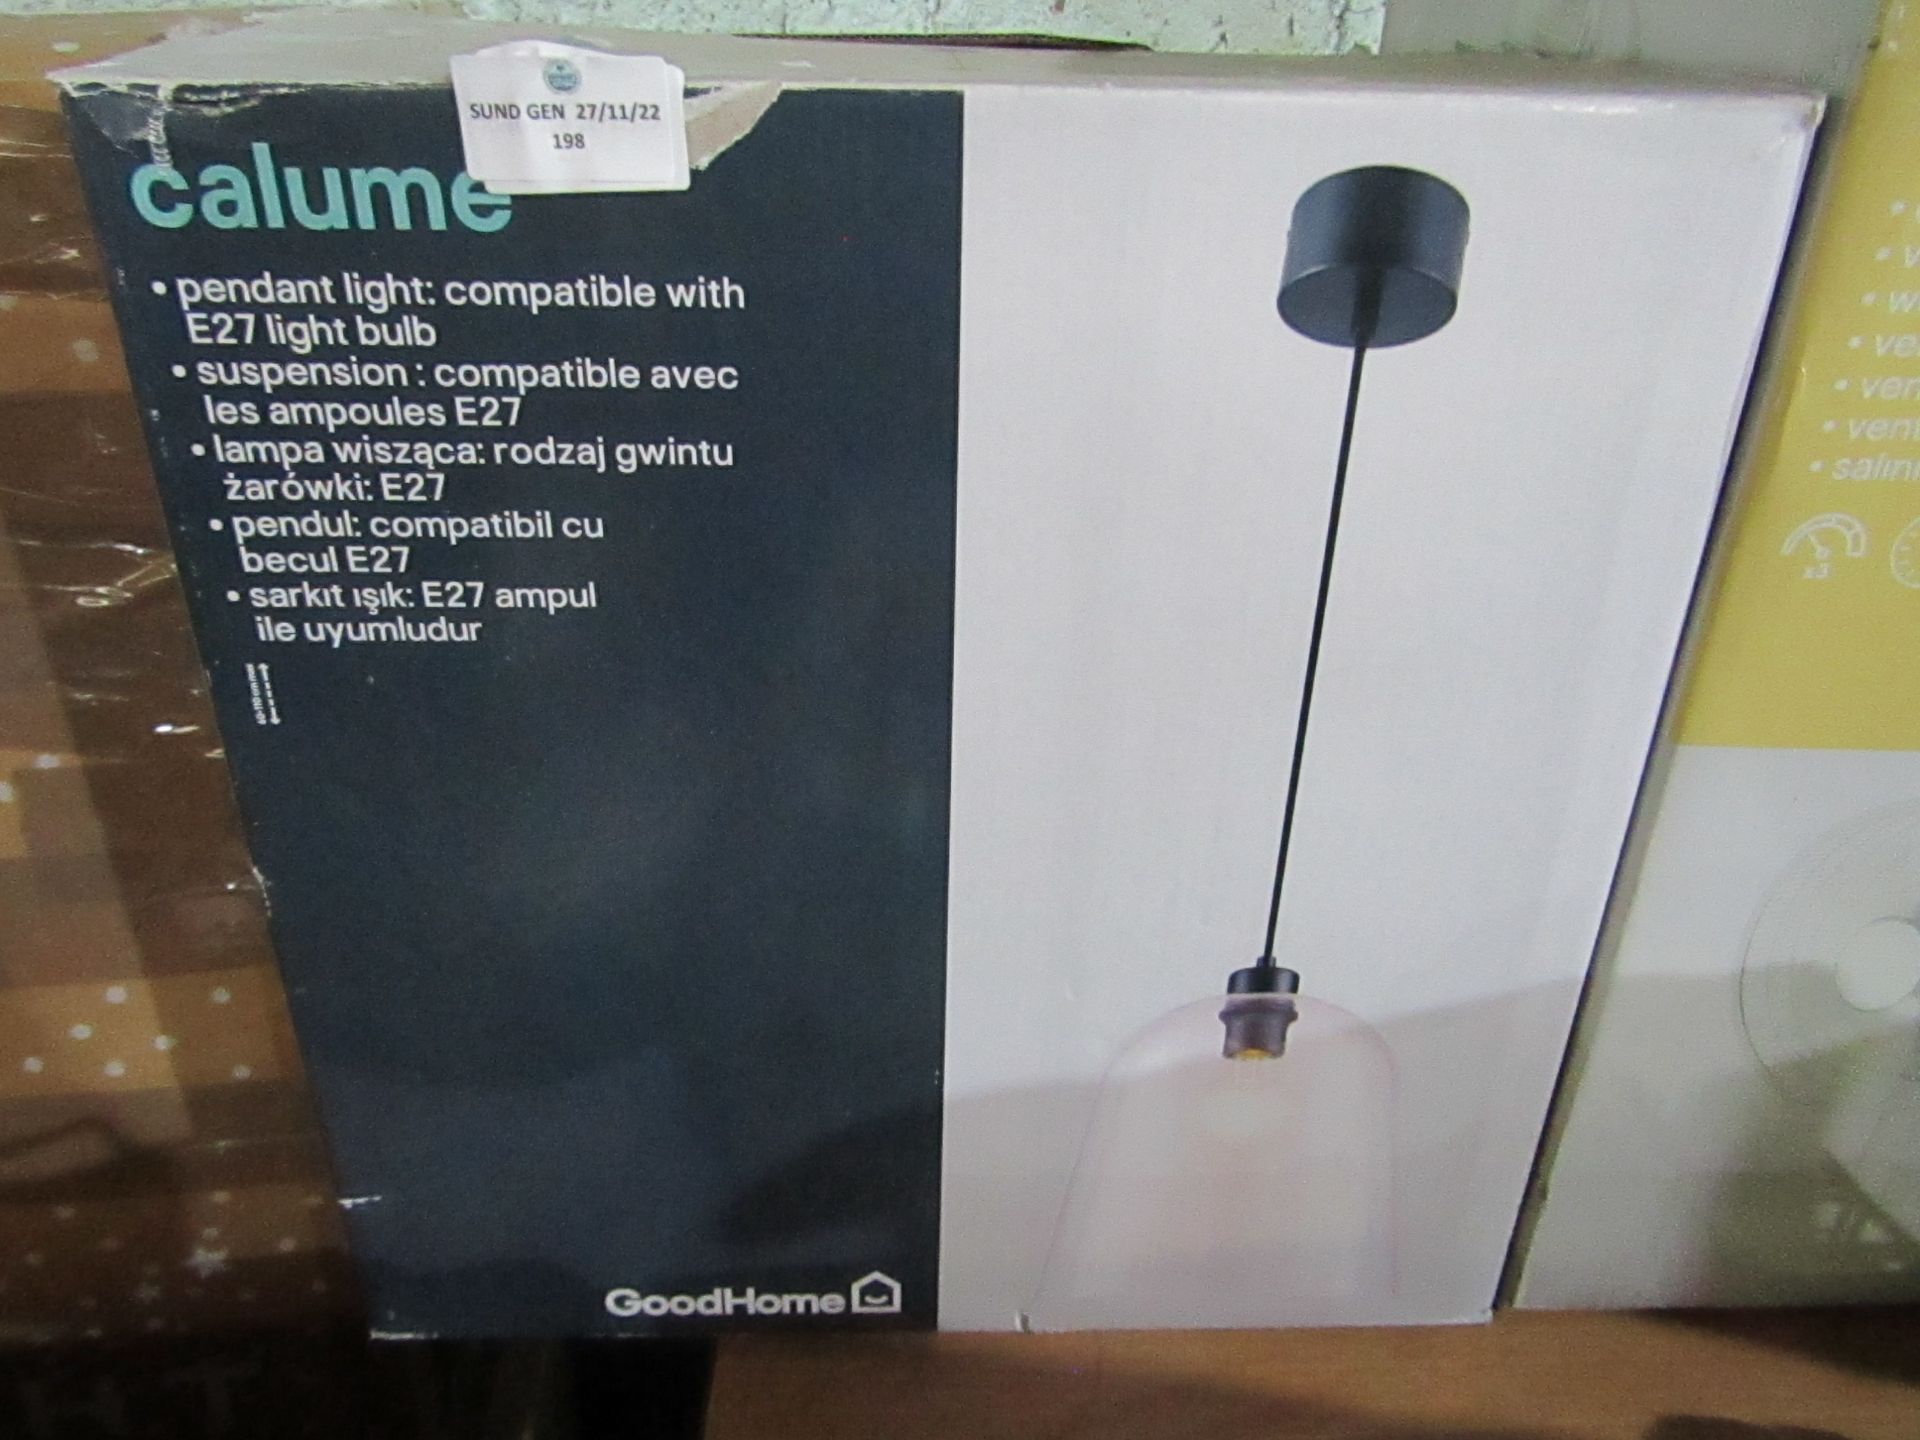 GoodHome - Calume Pendant Light - Unchecked & Boxed.